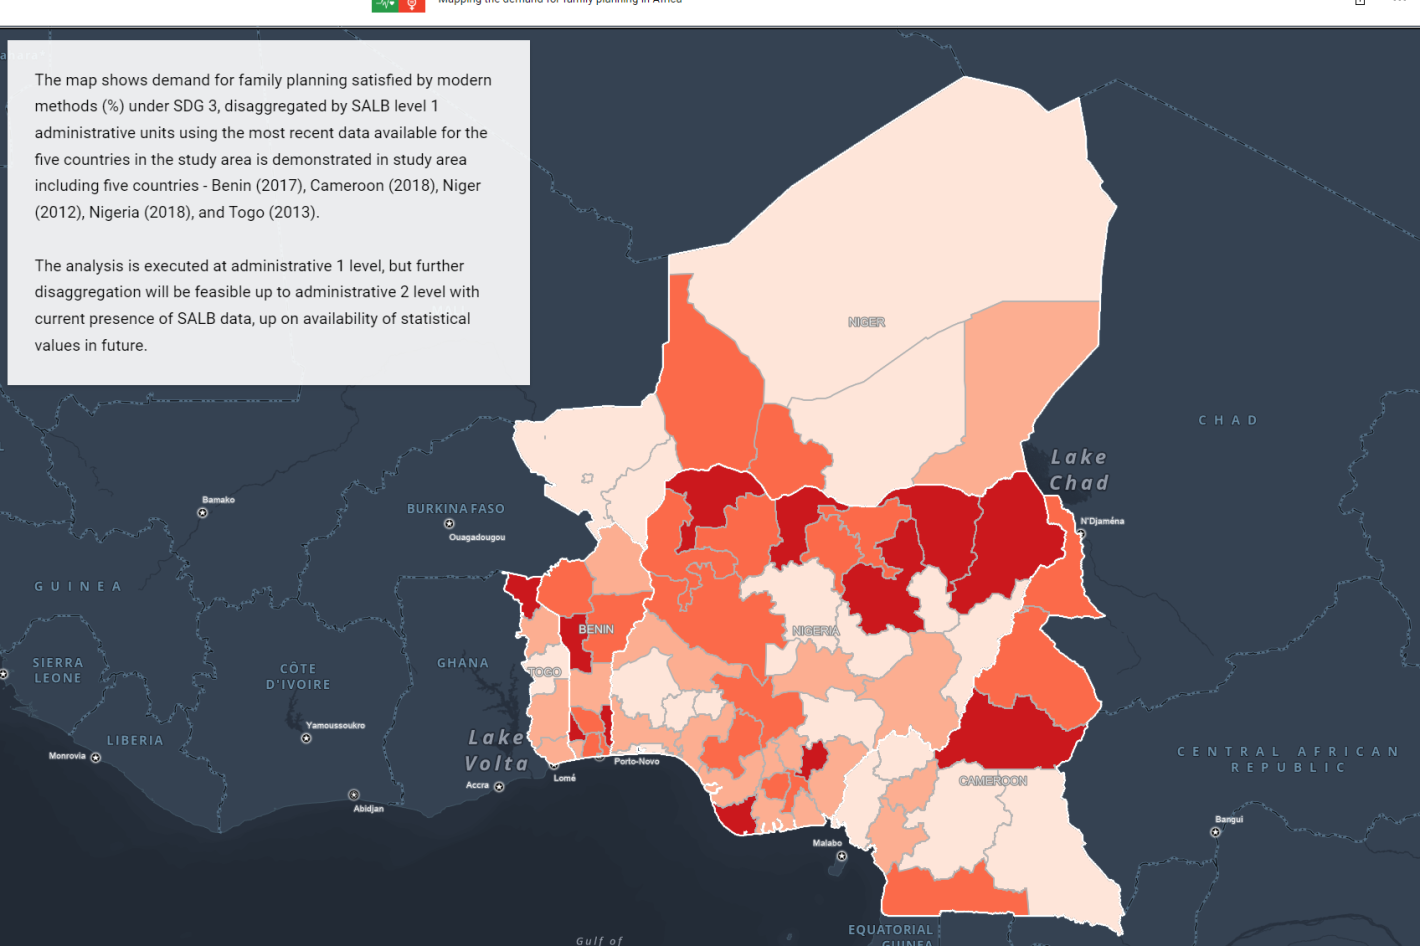 Map of Central and Western Africa on Family planning demand 2012-2018